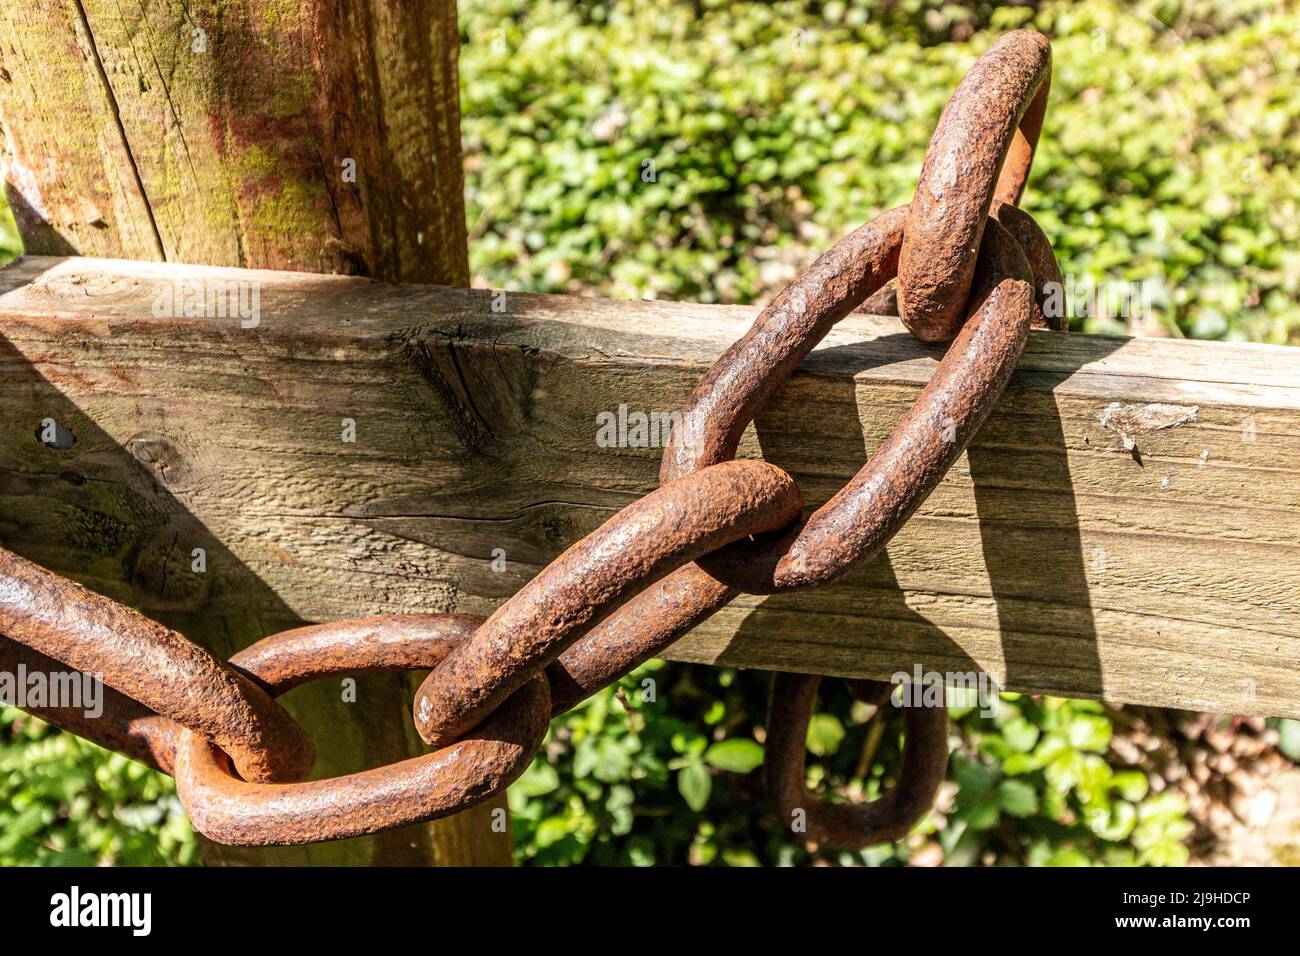 A close up view of a thick metal chain holding a gate closed Stock Photo